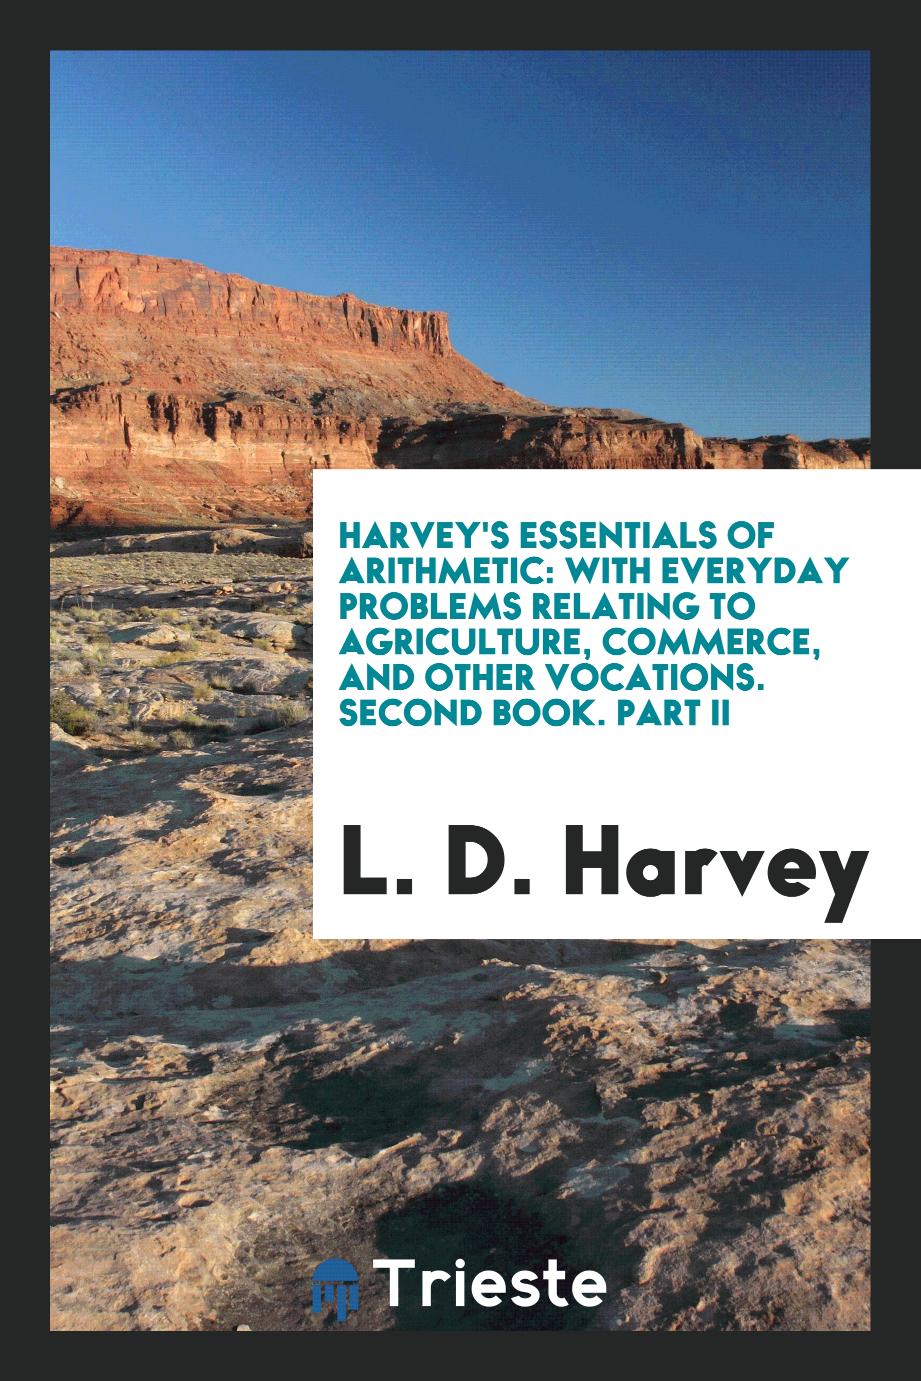 Harvey's Essentials of Arithmetic: With Everyday Problems Relating to Agriculture, Commerce, and Other Vocations. Second Book. Part II